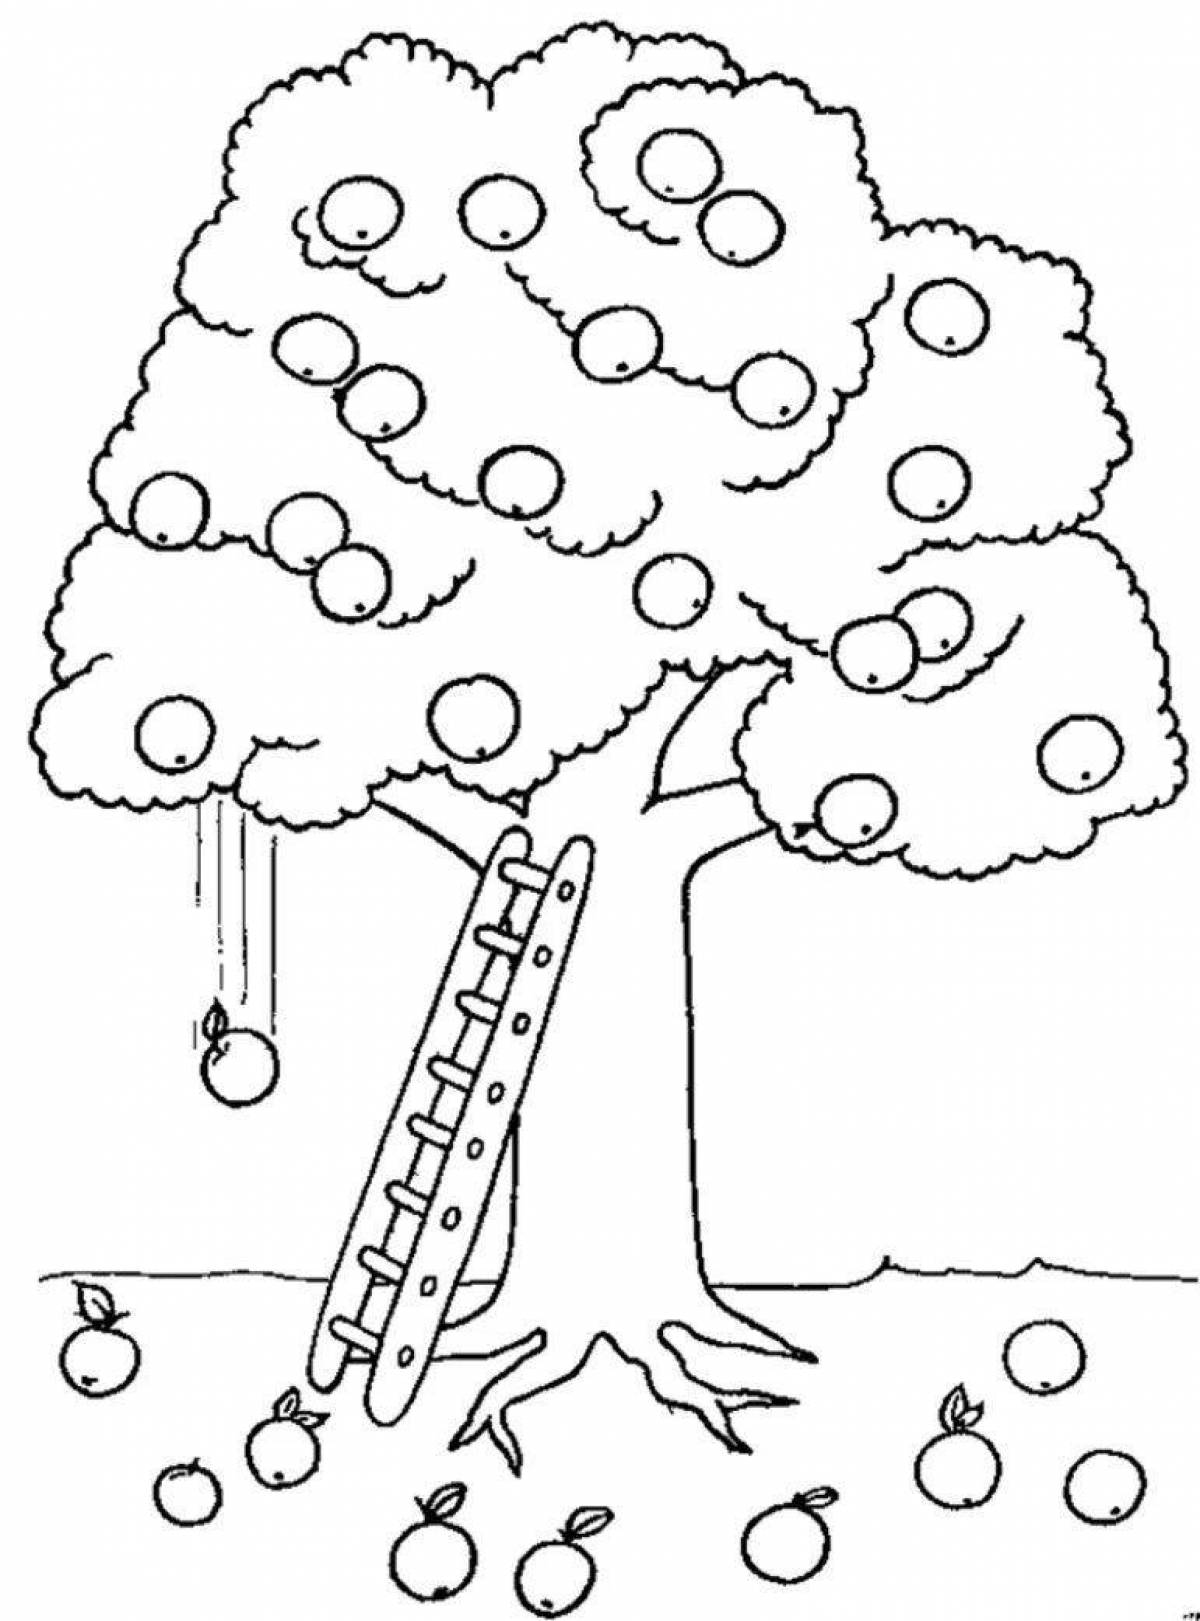 Animated apple tree for the little ones